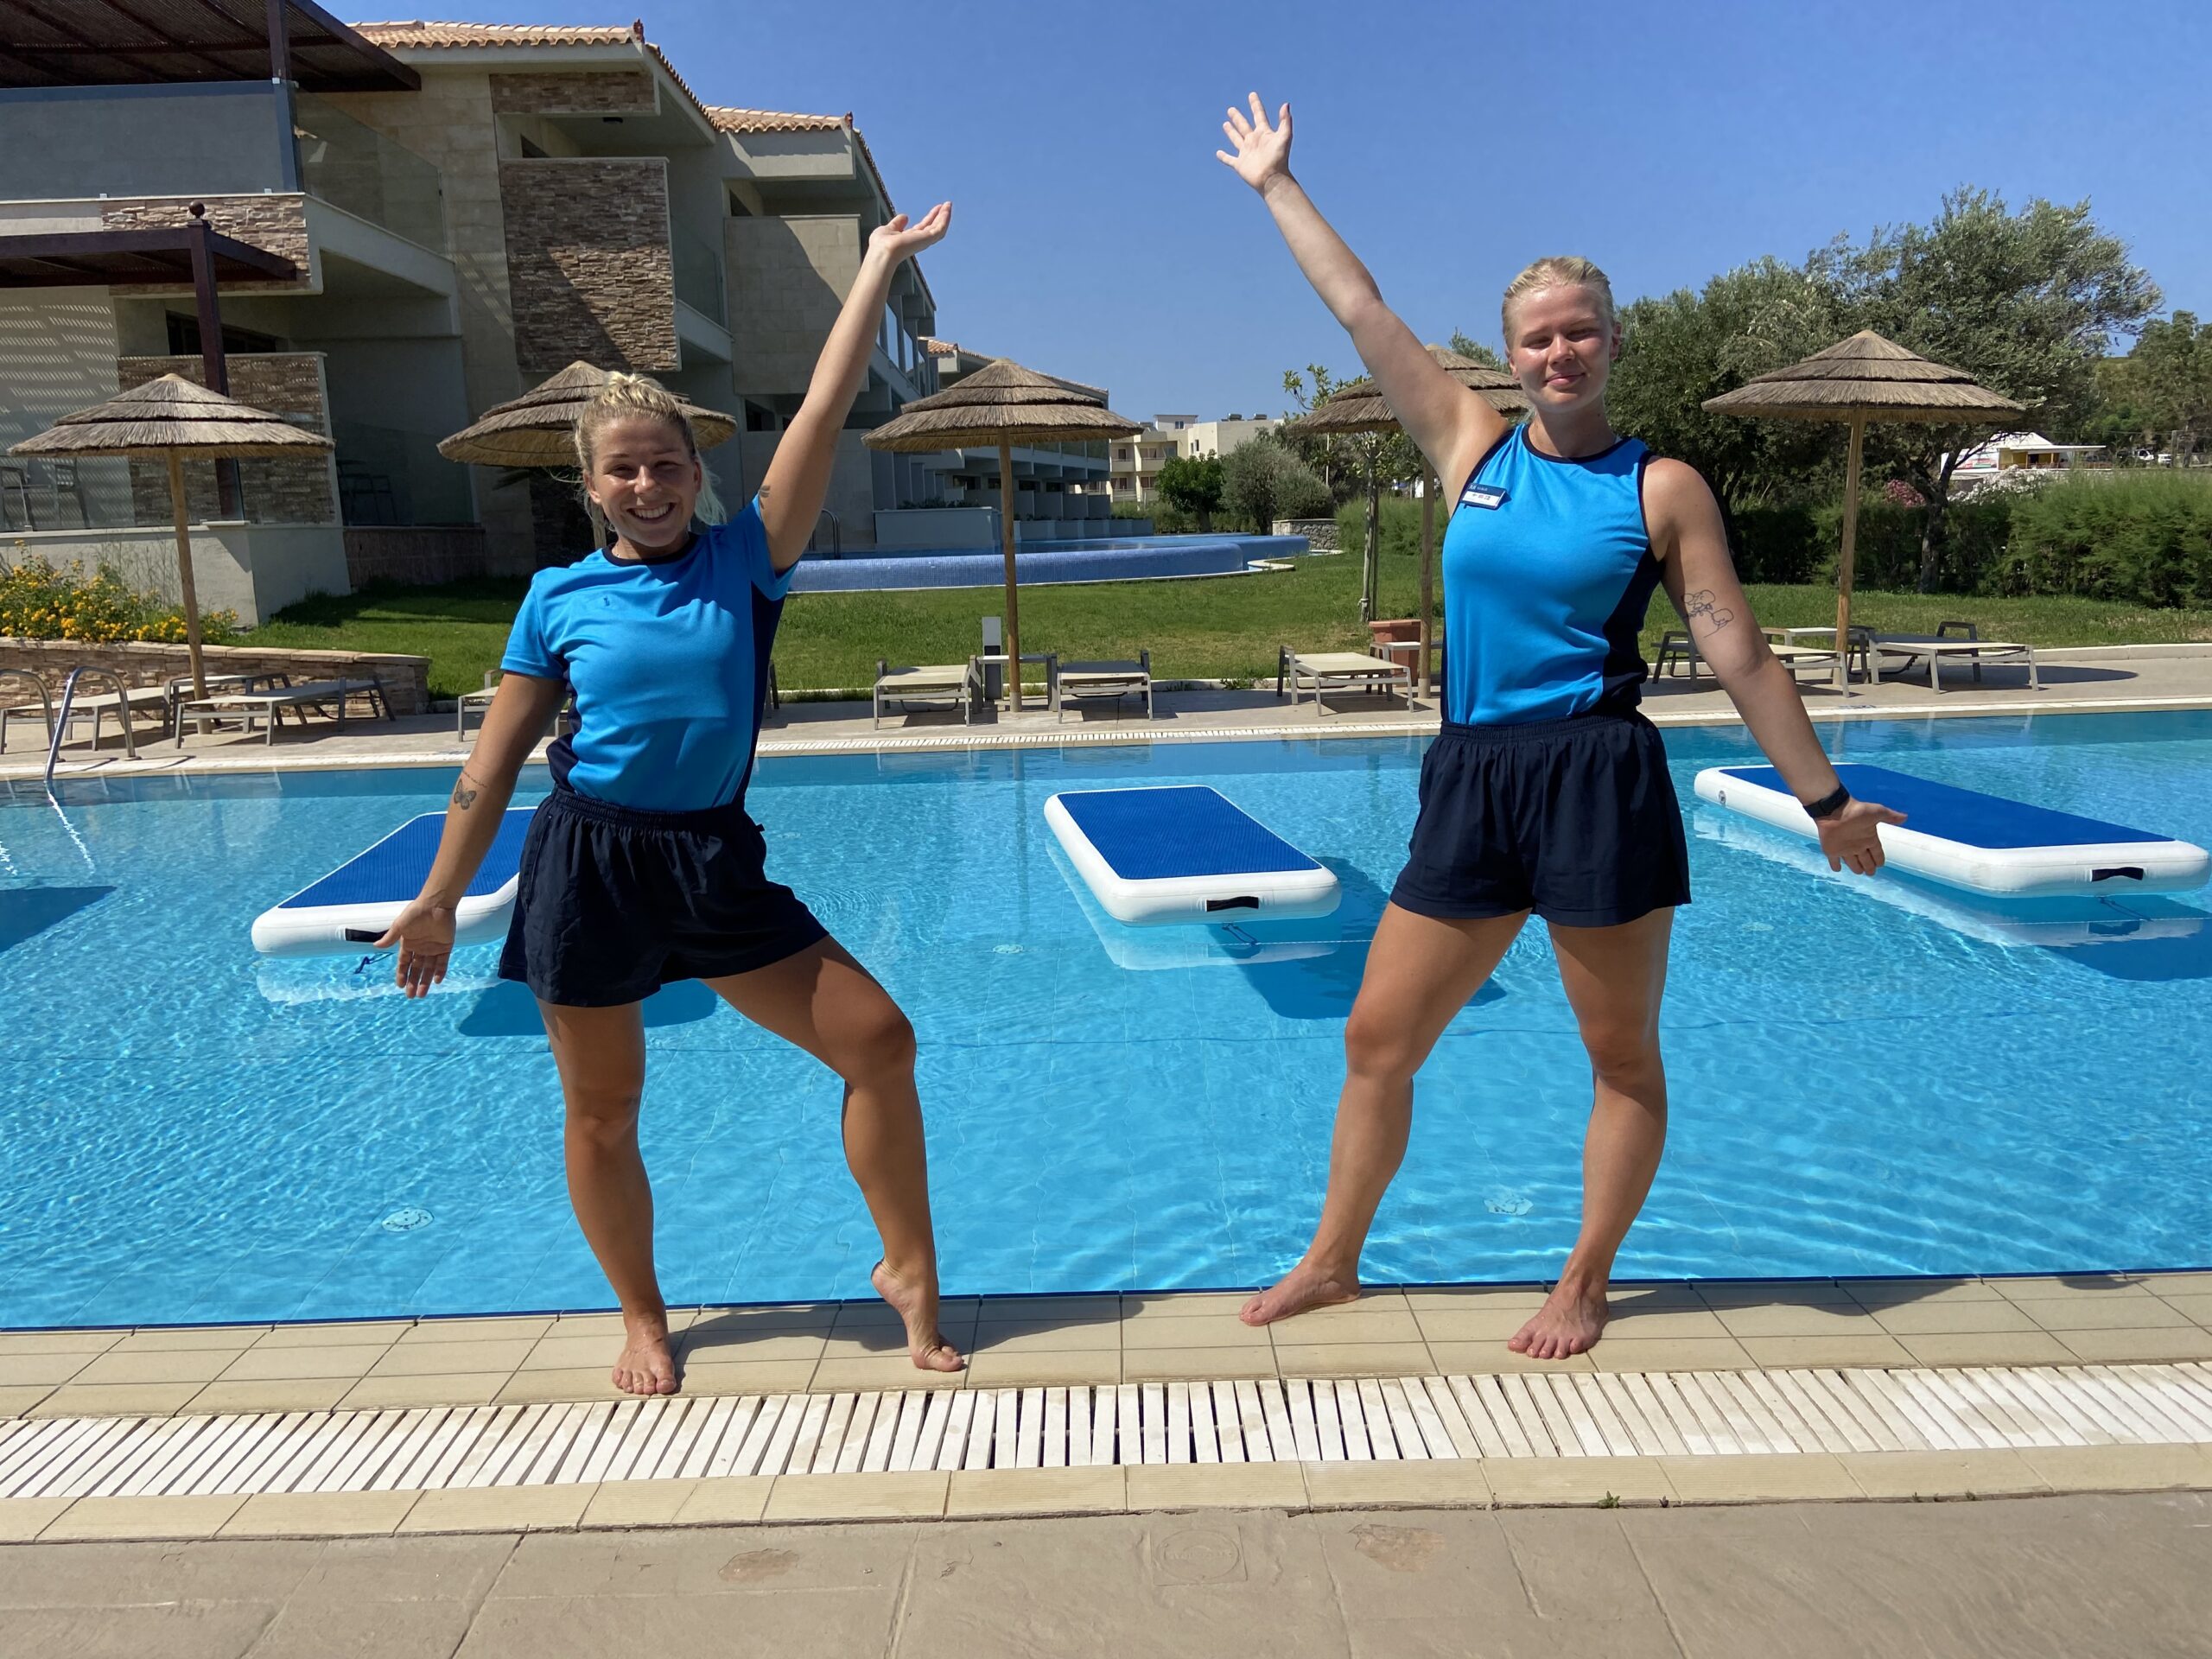 Two swimming instructors stood in front of a pool with their arms in the air smiling at the camera. There is a hotel in the background and it is a sunny day.